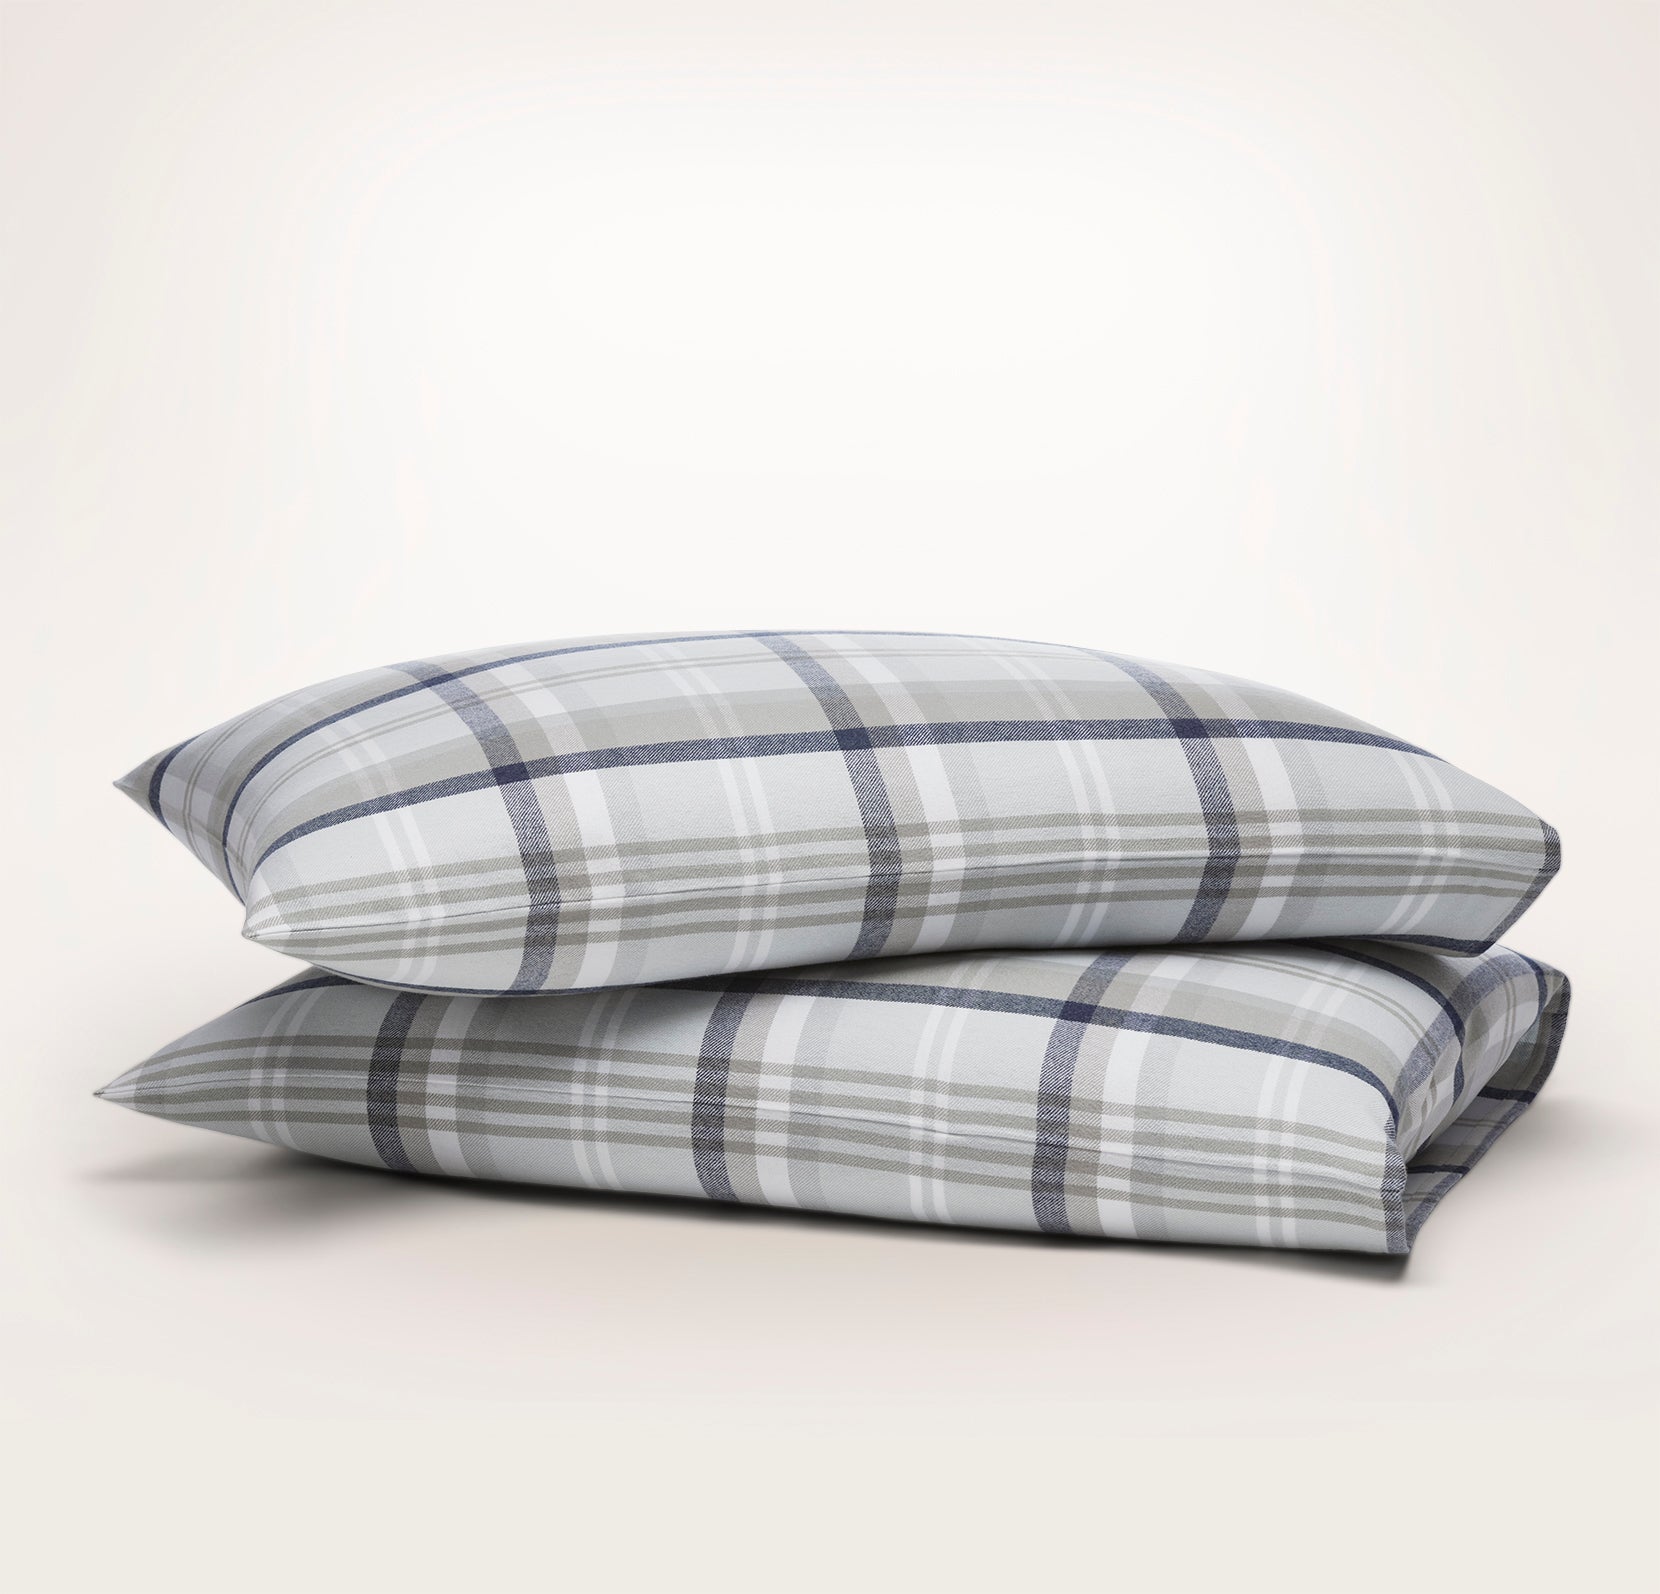 Flannel Pillowcase Set in Shore Heathered Plaid